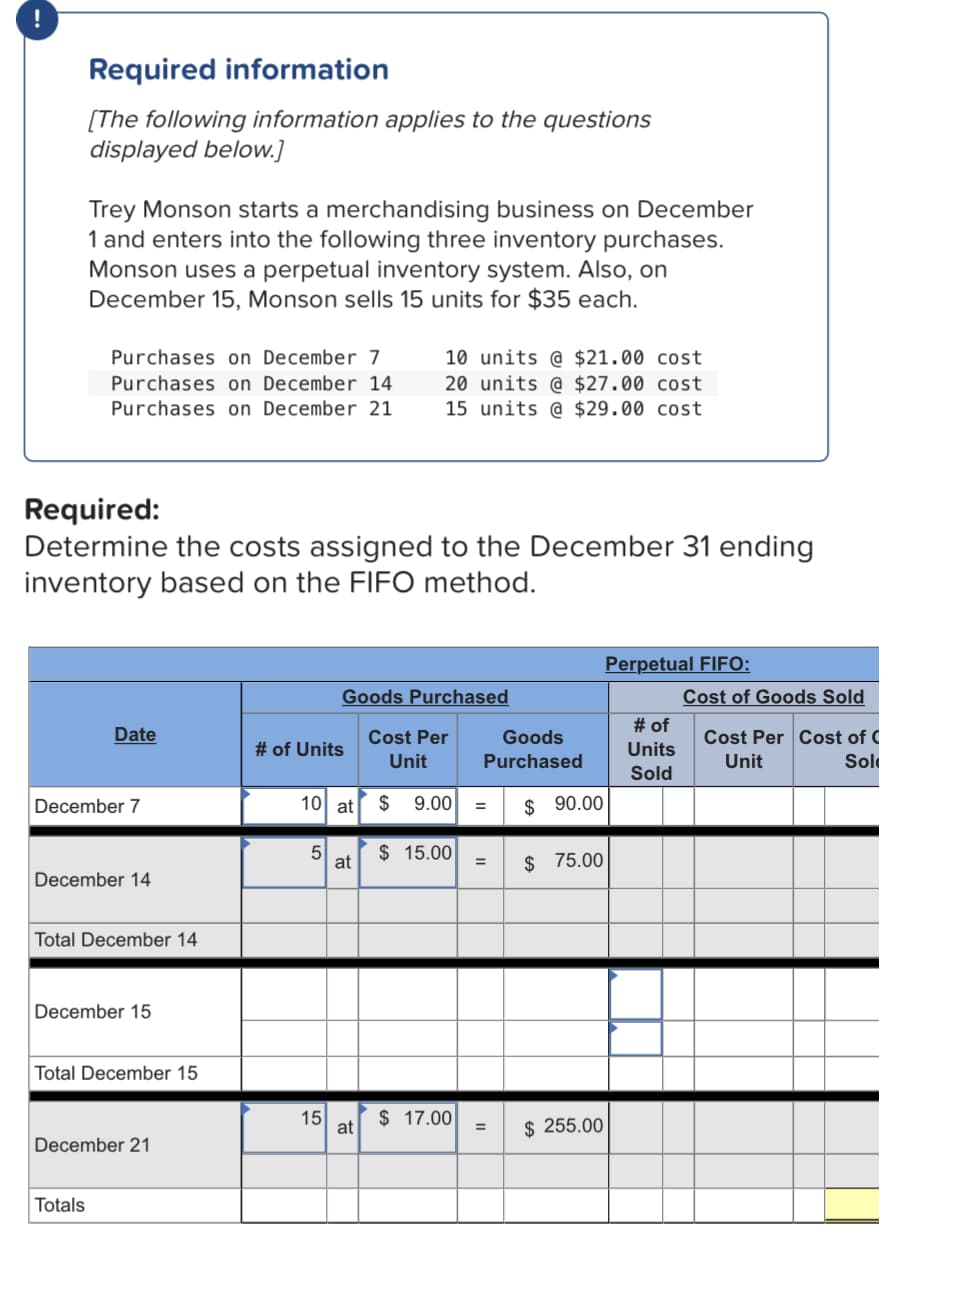 Required information
[The following information applies to the questions
displayed below.]
Trey Monson starts a merchandising business on December
1 and enters into the following three inventory purchases.
Monson uses a perpetual inventory system. Also, on
December 15, Monson sells 15 units for $35 each.
Purchases on December 7
Purchases on December 14
Purchases on December 21
10 units @ $21.00 cost
20 units @ $27.00 cost
15 units @ $29.00 cost
Required:
Determine the costs assigned to the December 31 ending
inventory based on the FIFO method.
Perpetual FIFO:
Cost of Goods Sold
# of
Goods Purchased
Date
Cost Per
Goods
Cost Per Cost of (
# of Units
Units
Unit
Purchased
Unit
Sol
Sold
December 7
10 at
$ 9.00
$ 90.00
$ 15.00
$ 75.00
at
%3D
December 14
Total December 14
December 15
Total December 15
15
at
$ 17.00
$ 255.00
December 21
Totals
